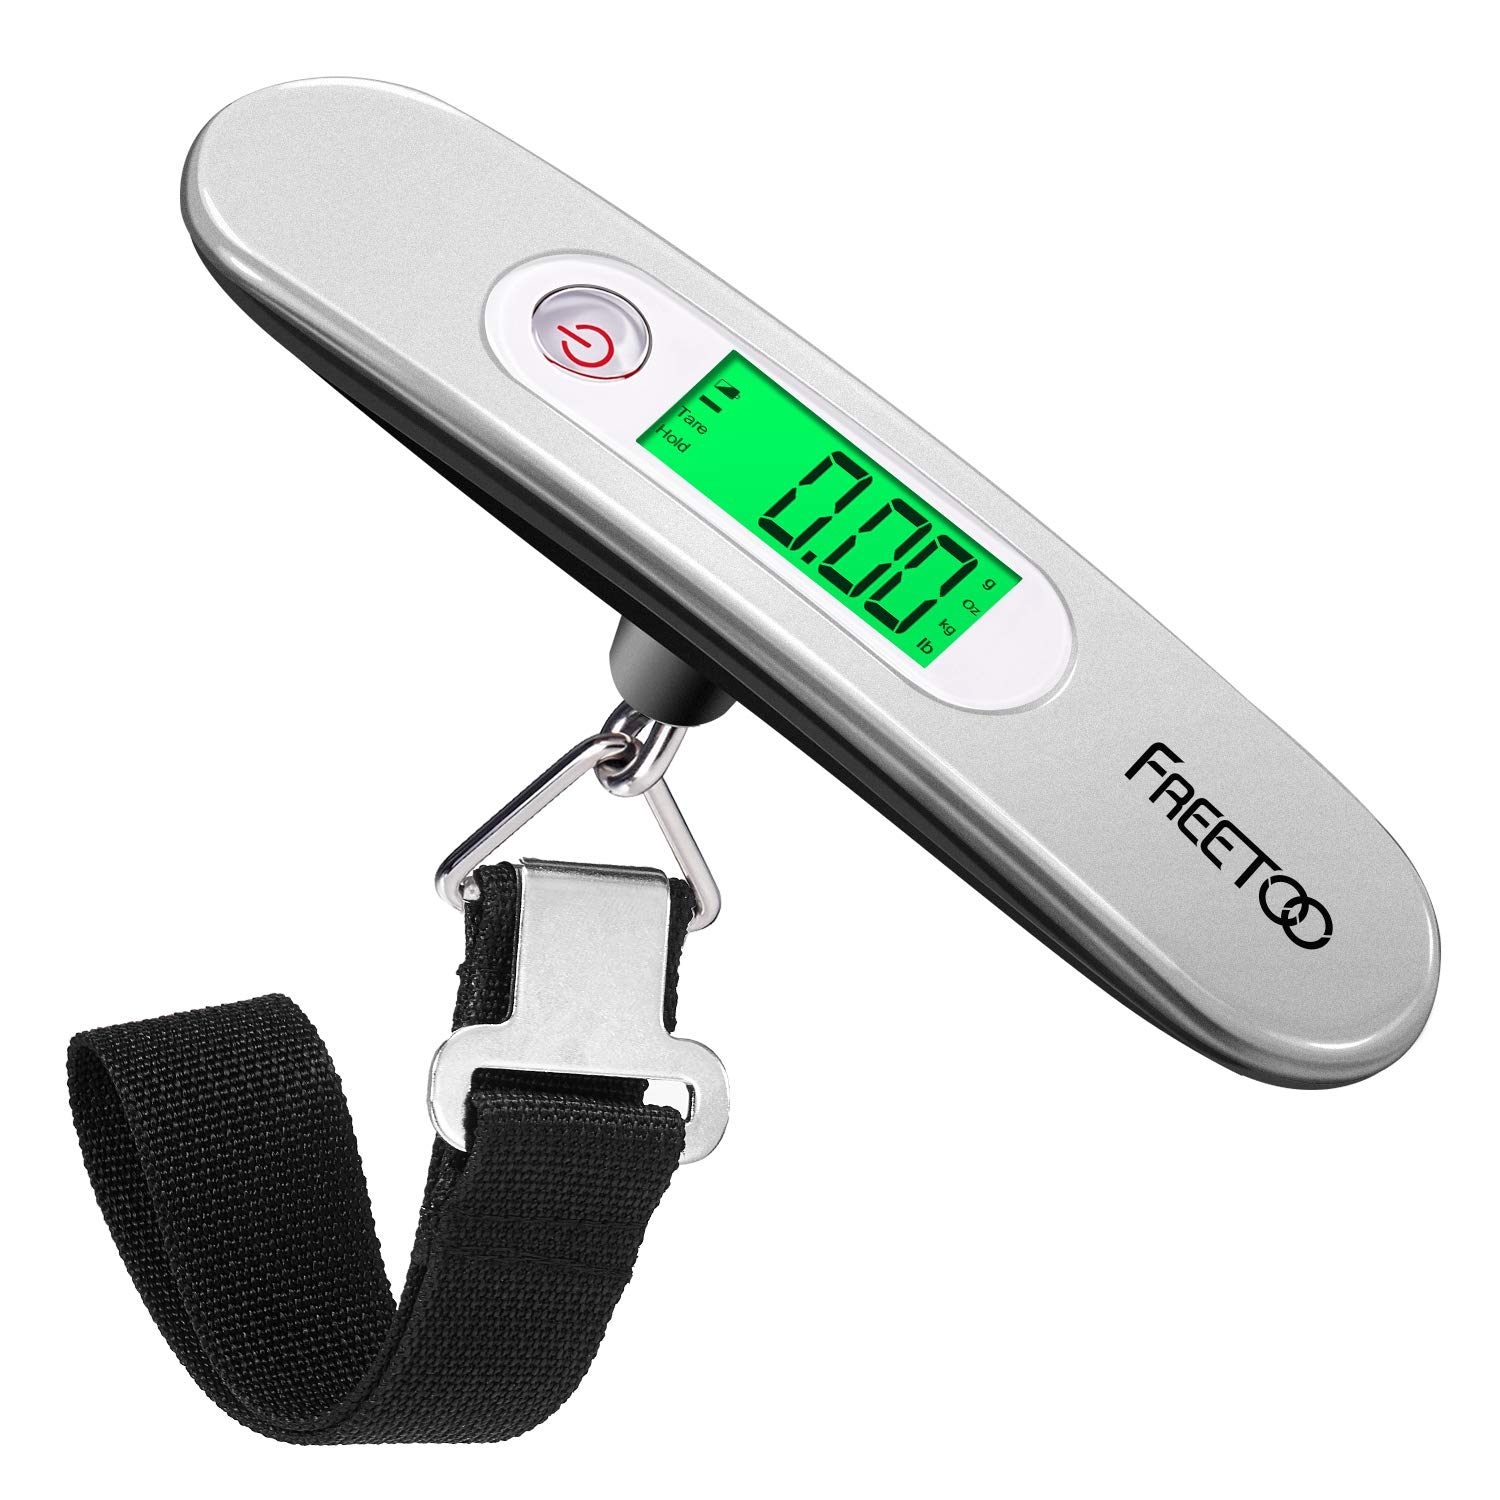 Portable Digital Luggage Scale for Travel Bags